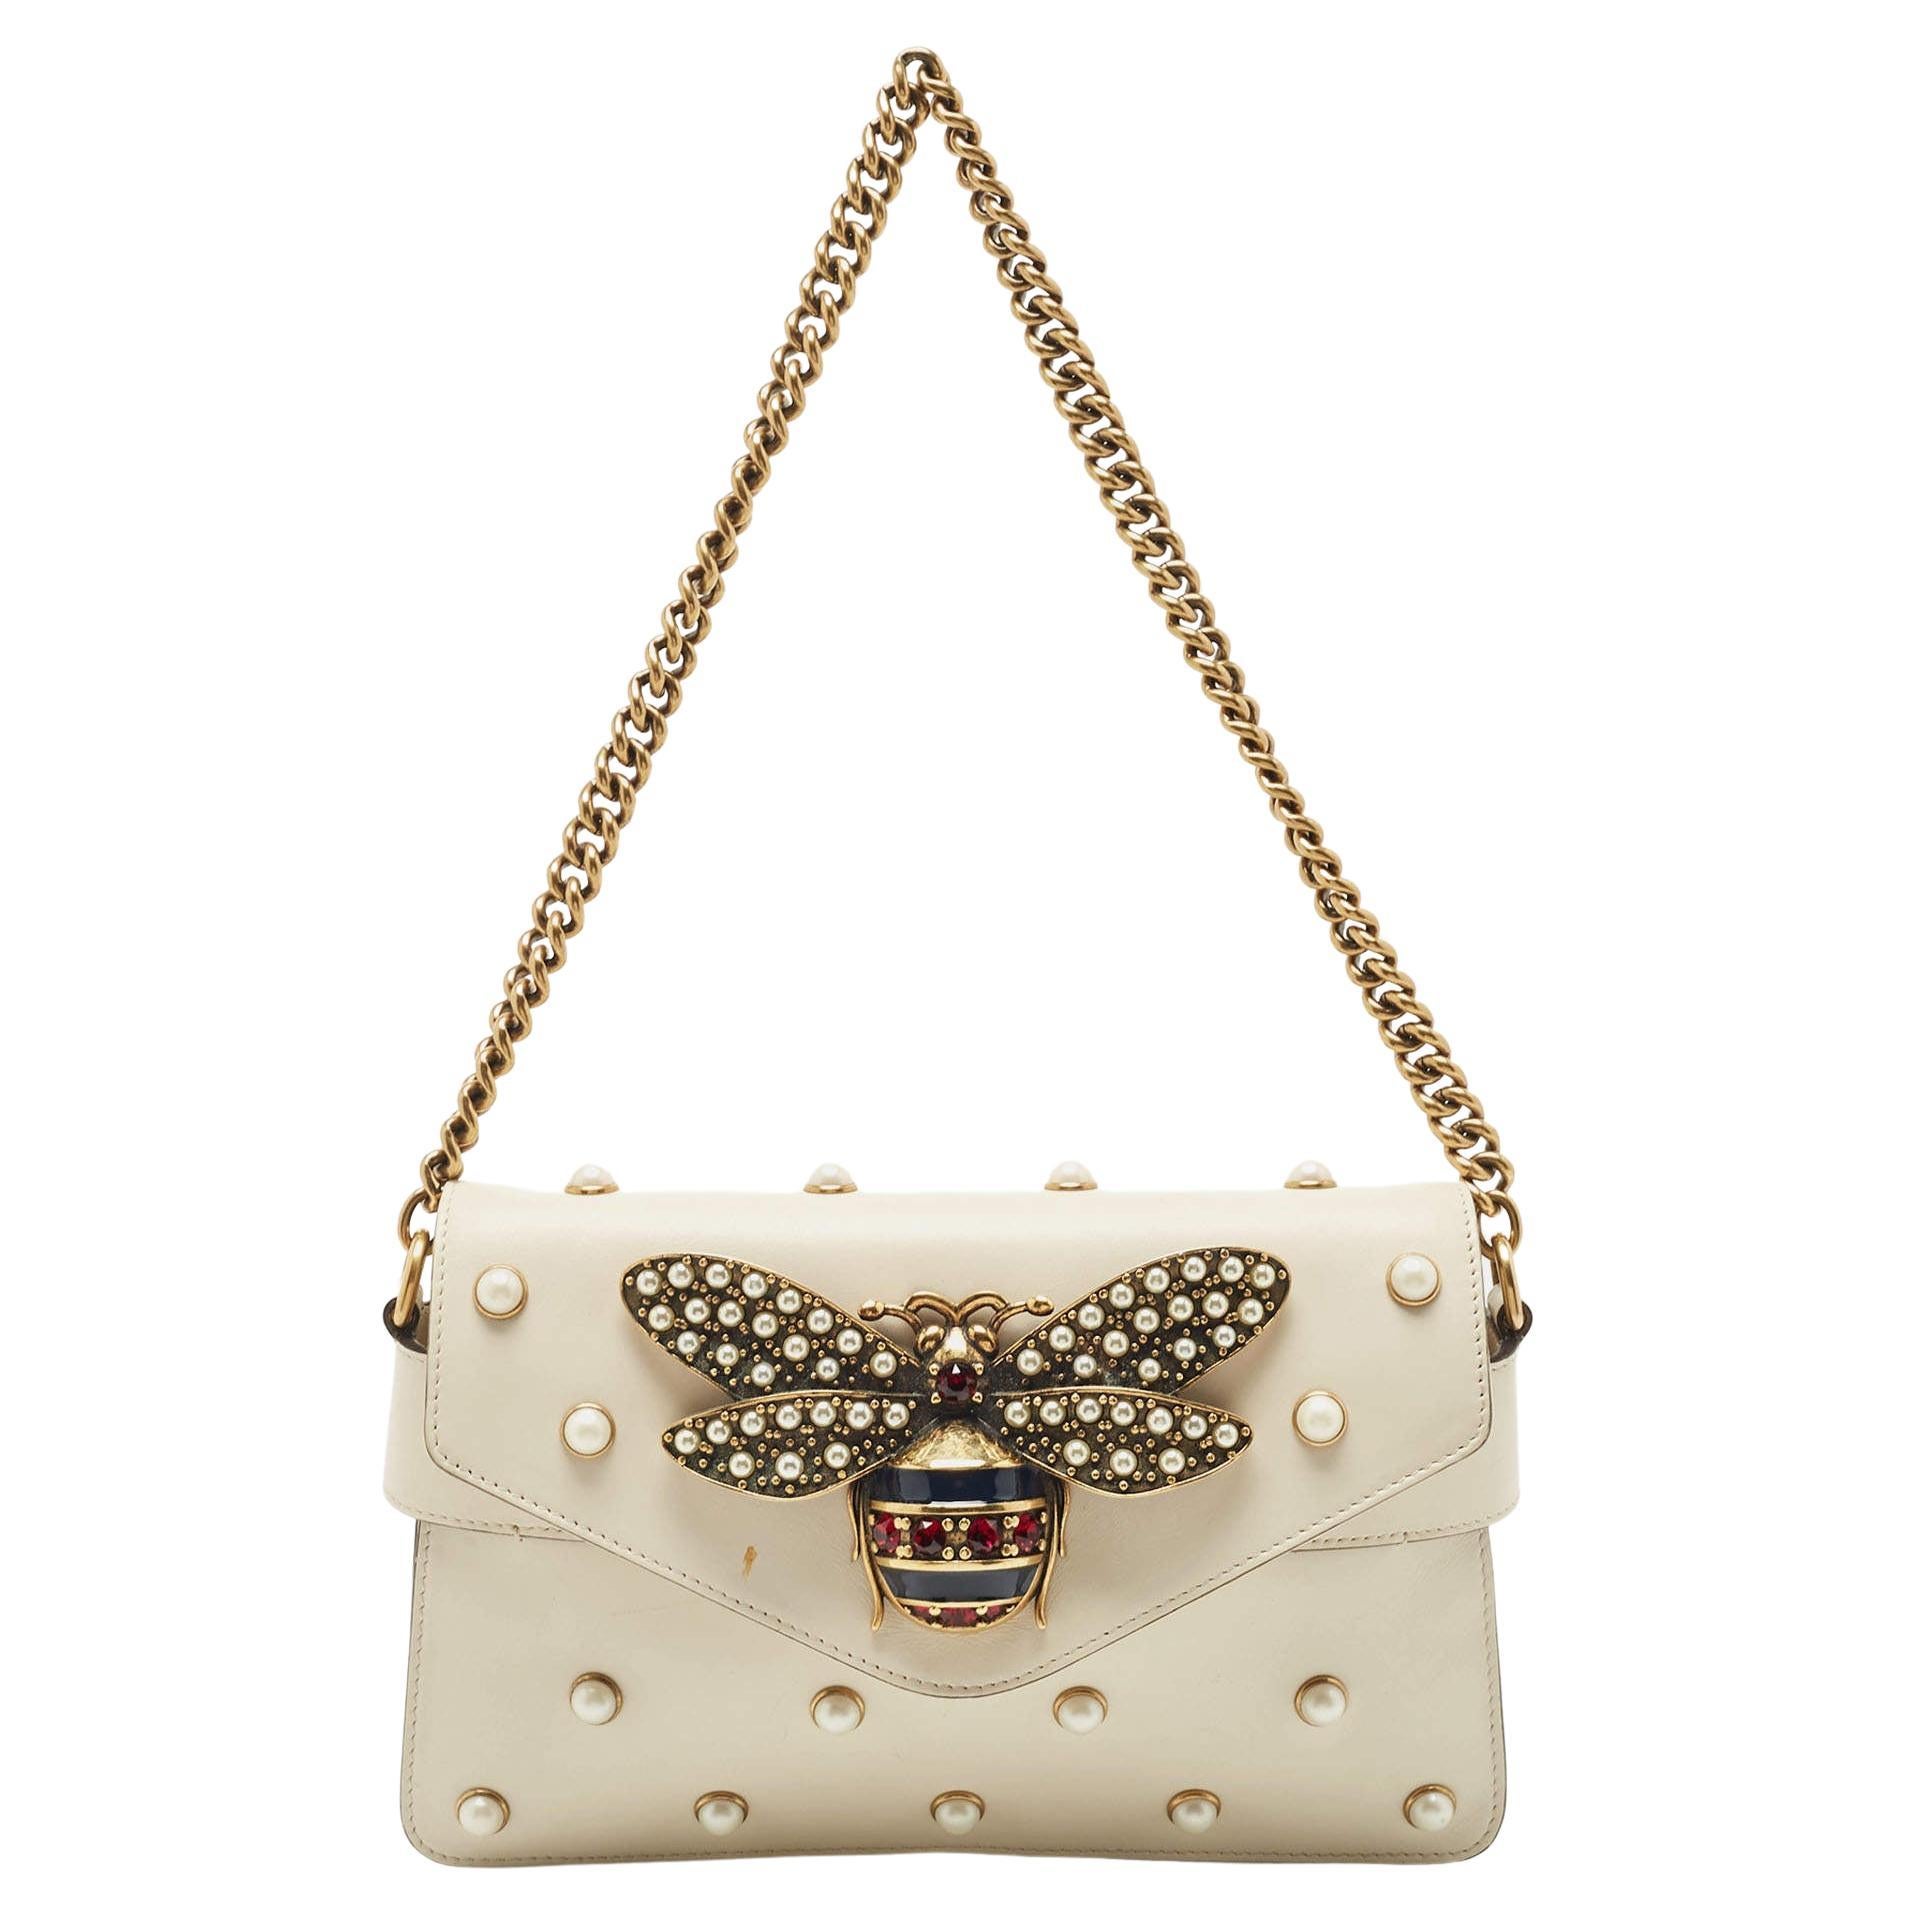 Gucci Cream Leather Mini Pearl Studded Queen Margaret Broadway Shoulder Bag